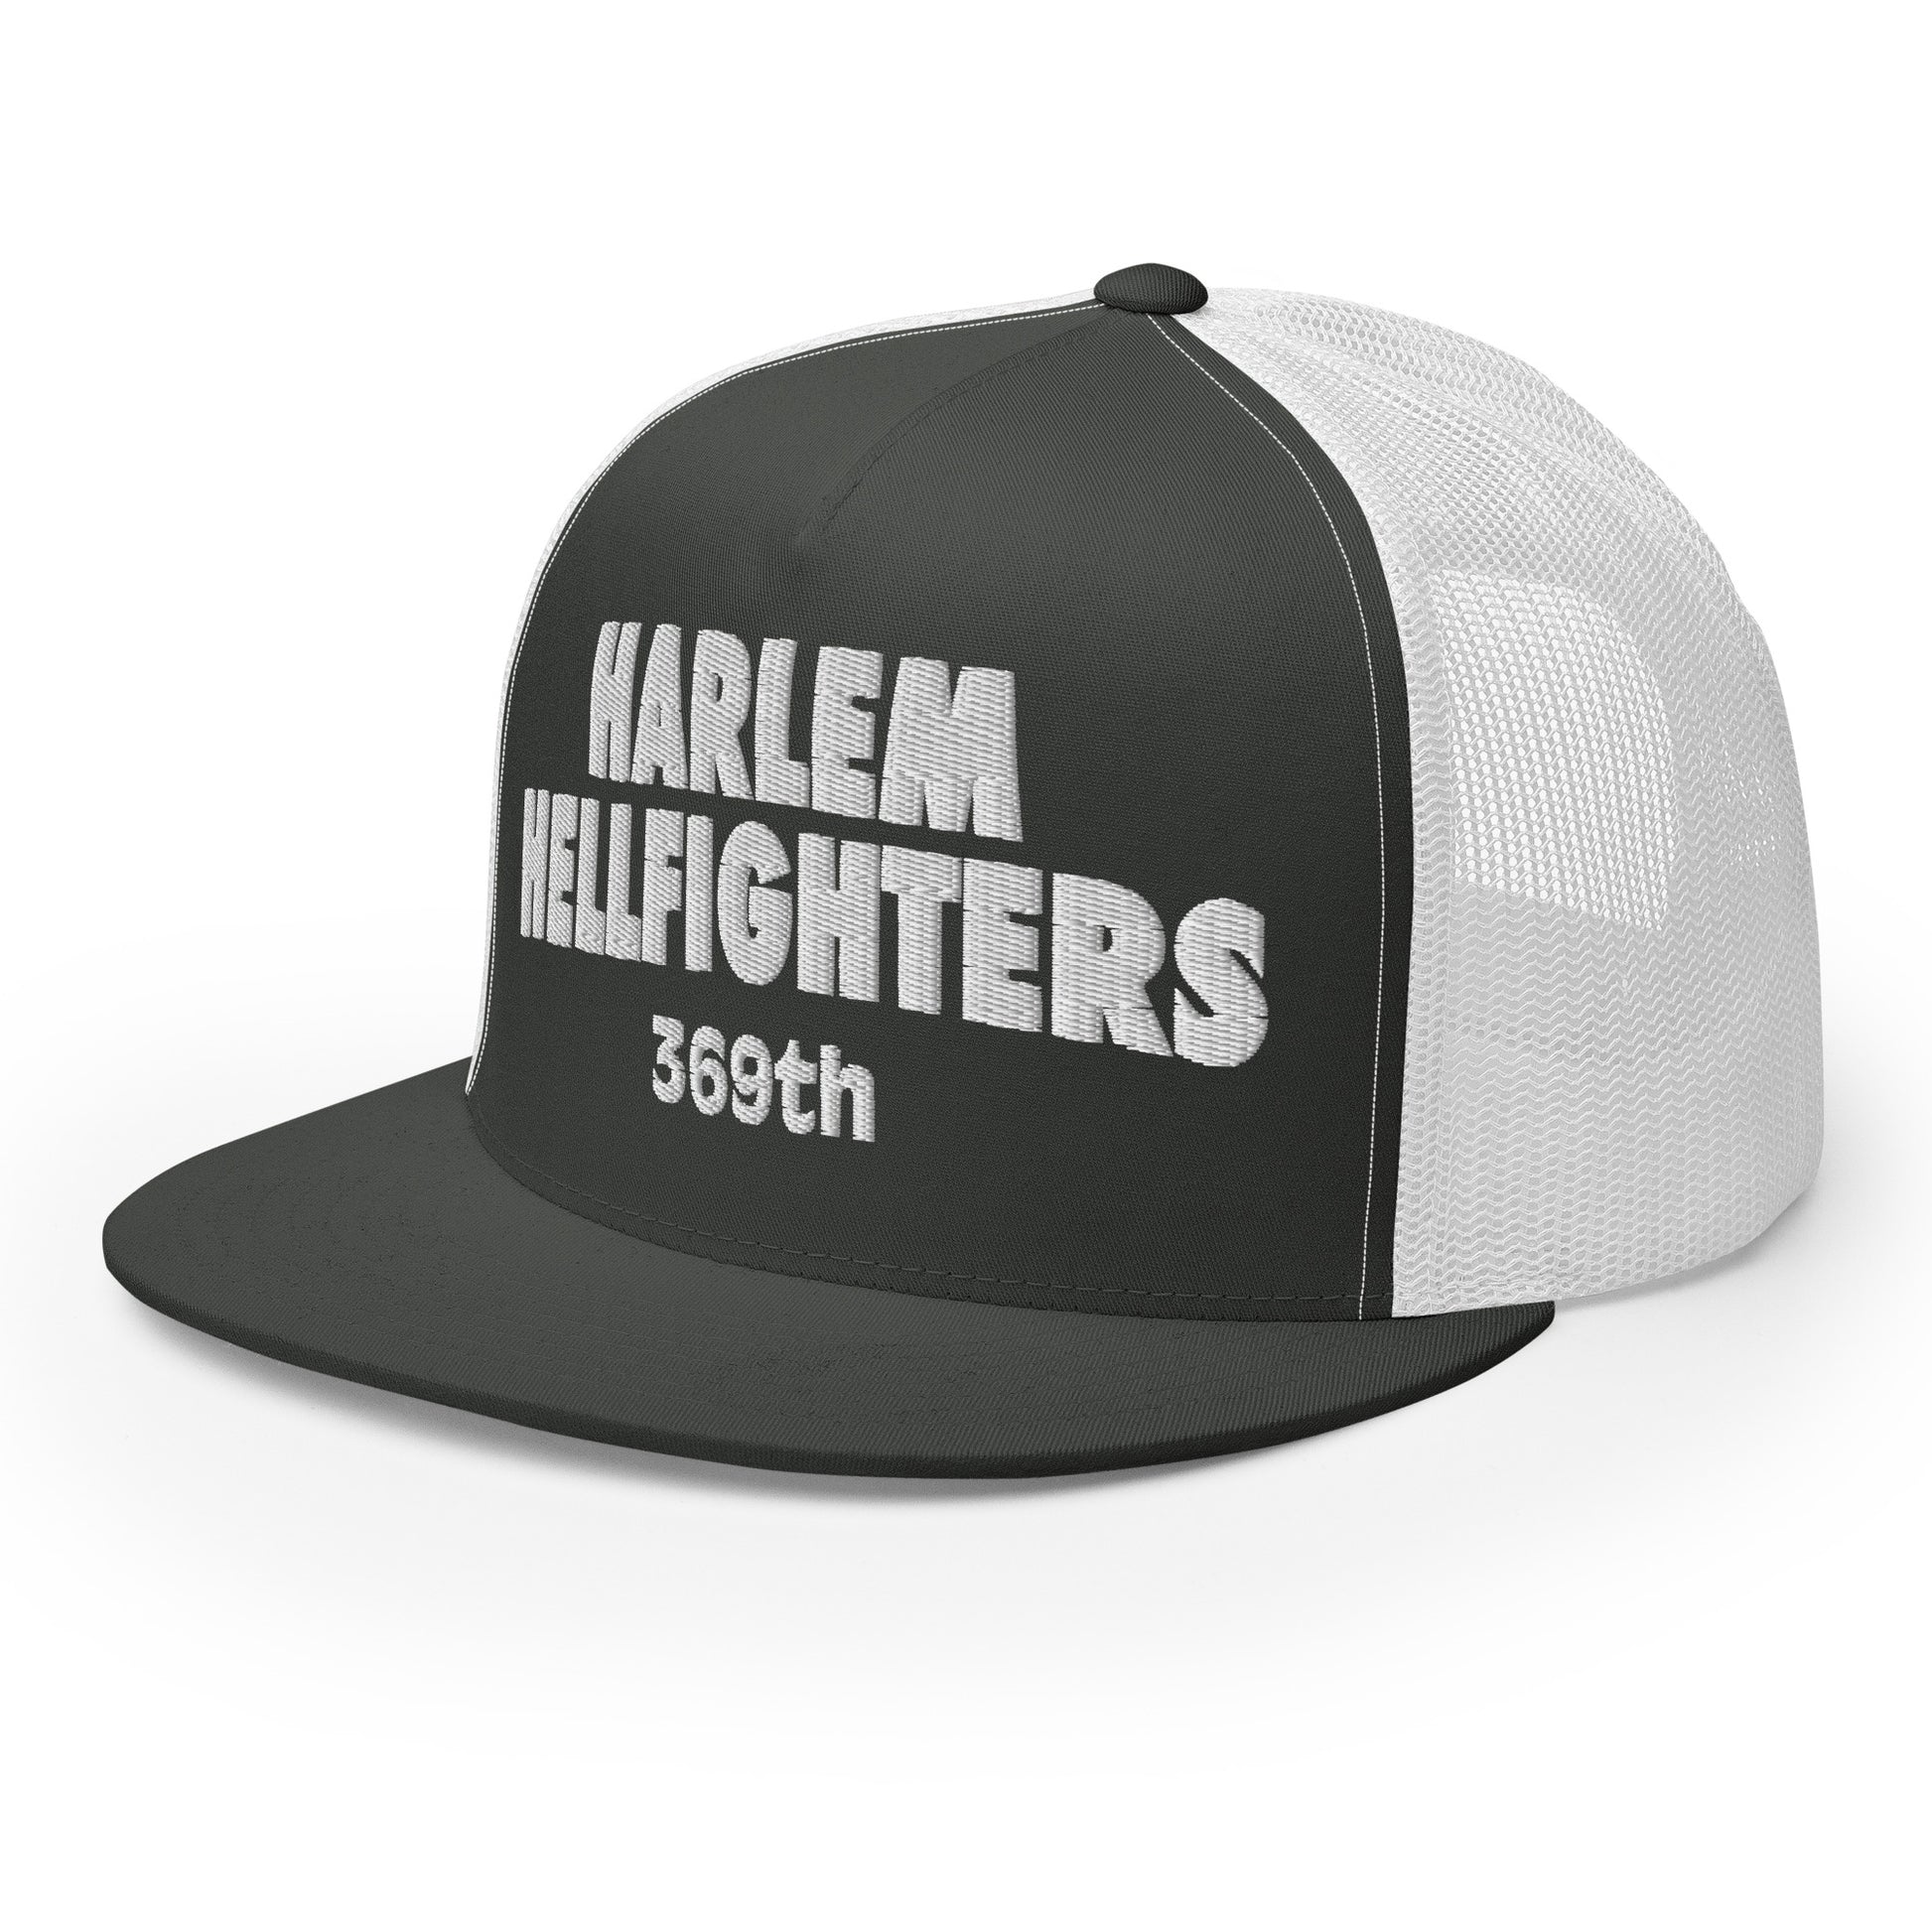 white and grey trucker hat with harlem hellfighters 369th embroidery